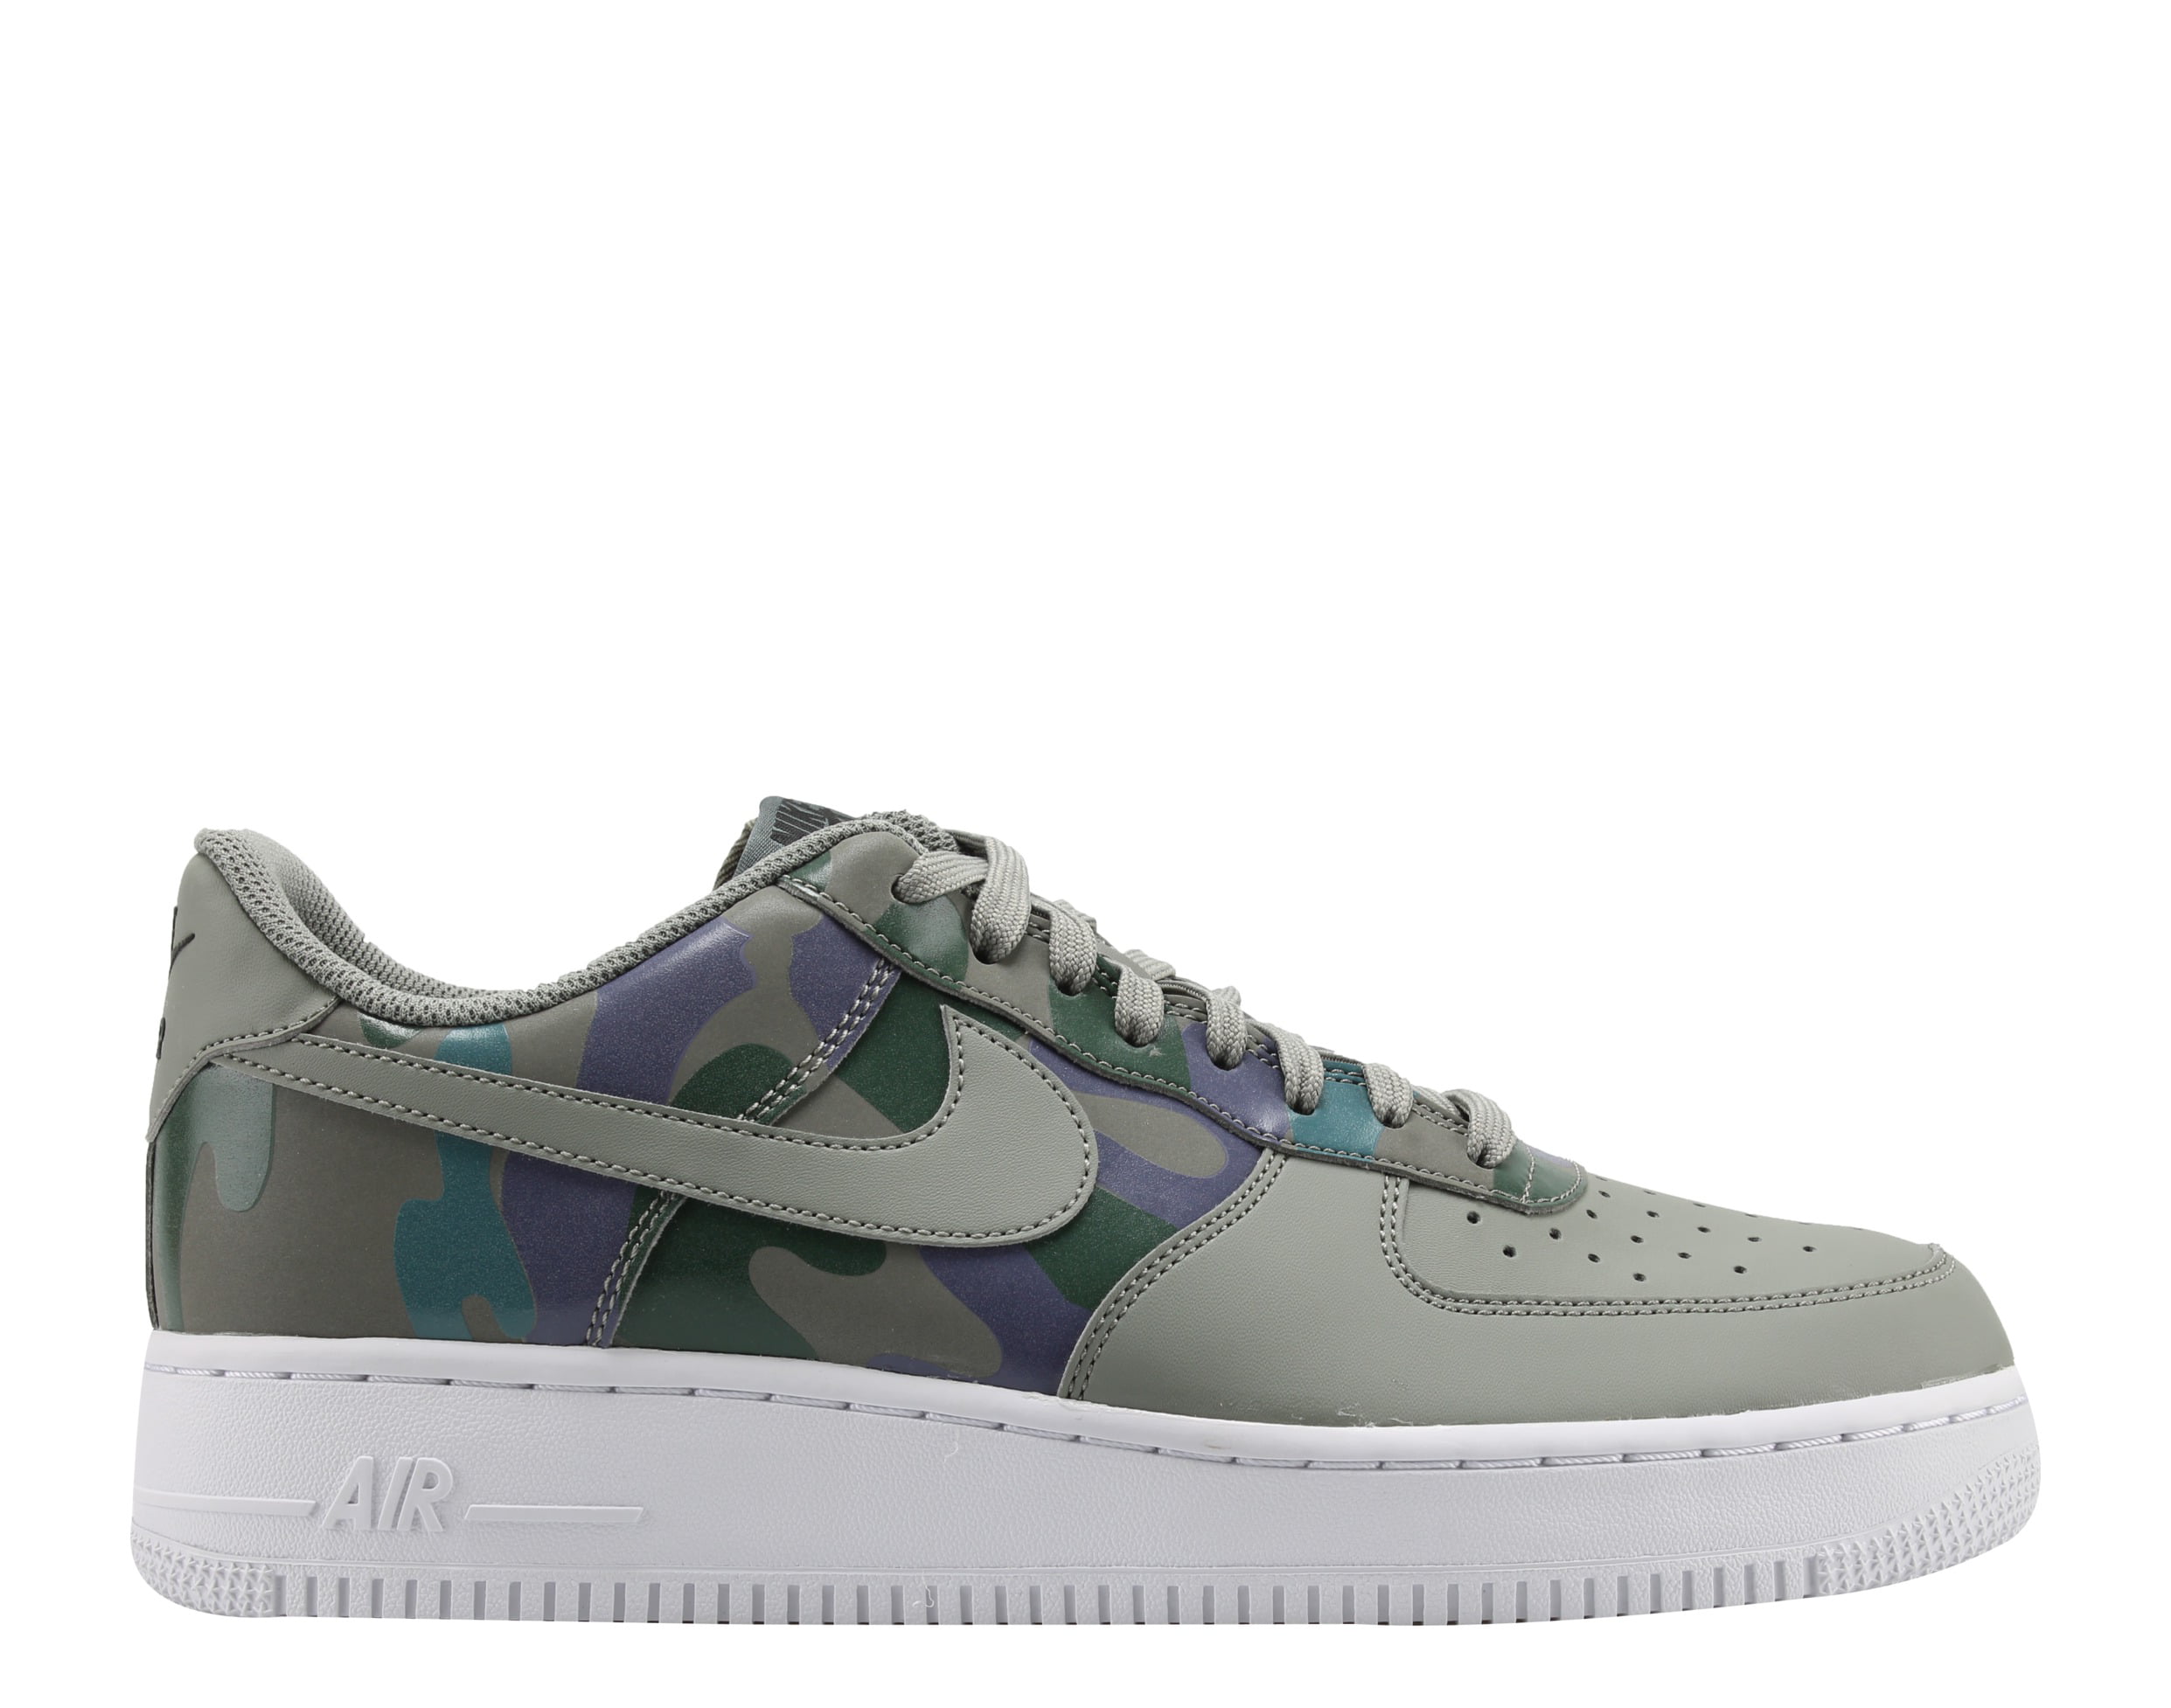 Nike Air Force 1 '07 LV8 3 Quality Made Men's Size 12 Yell…